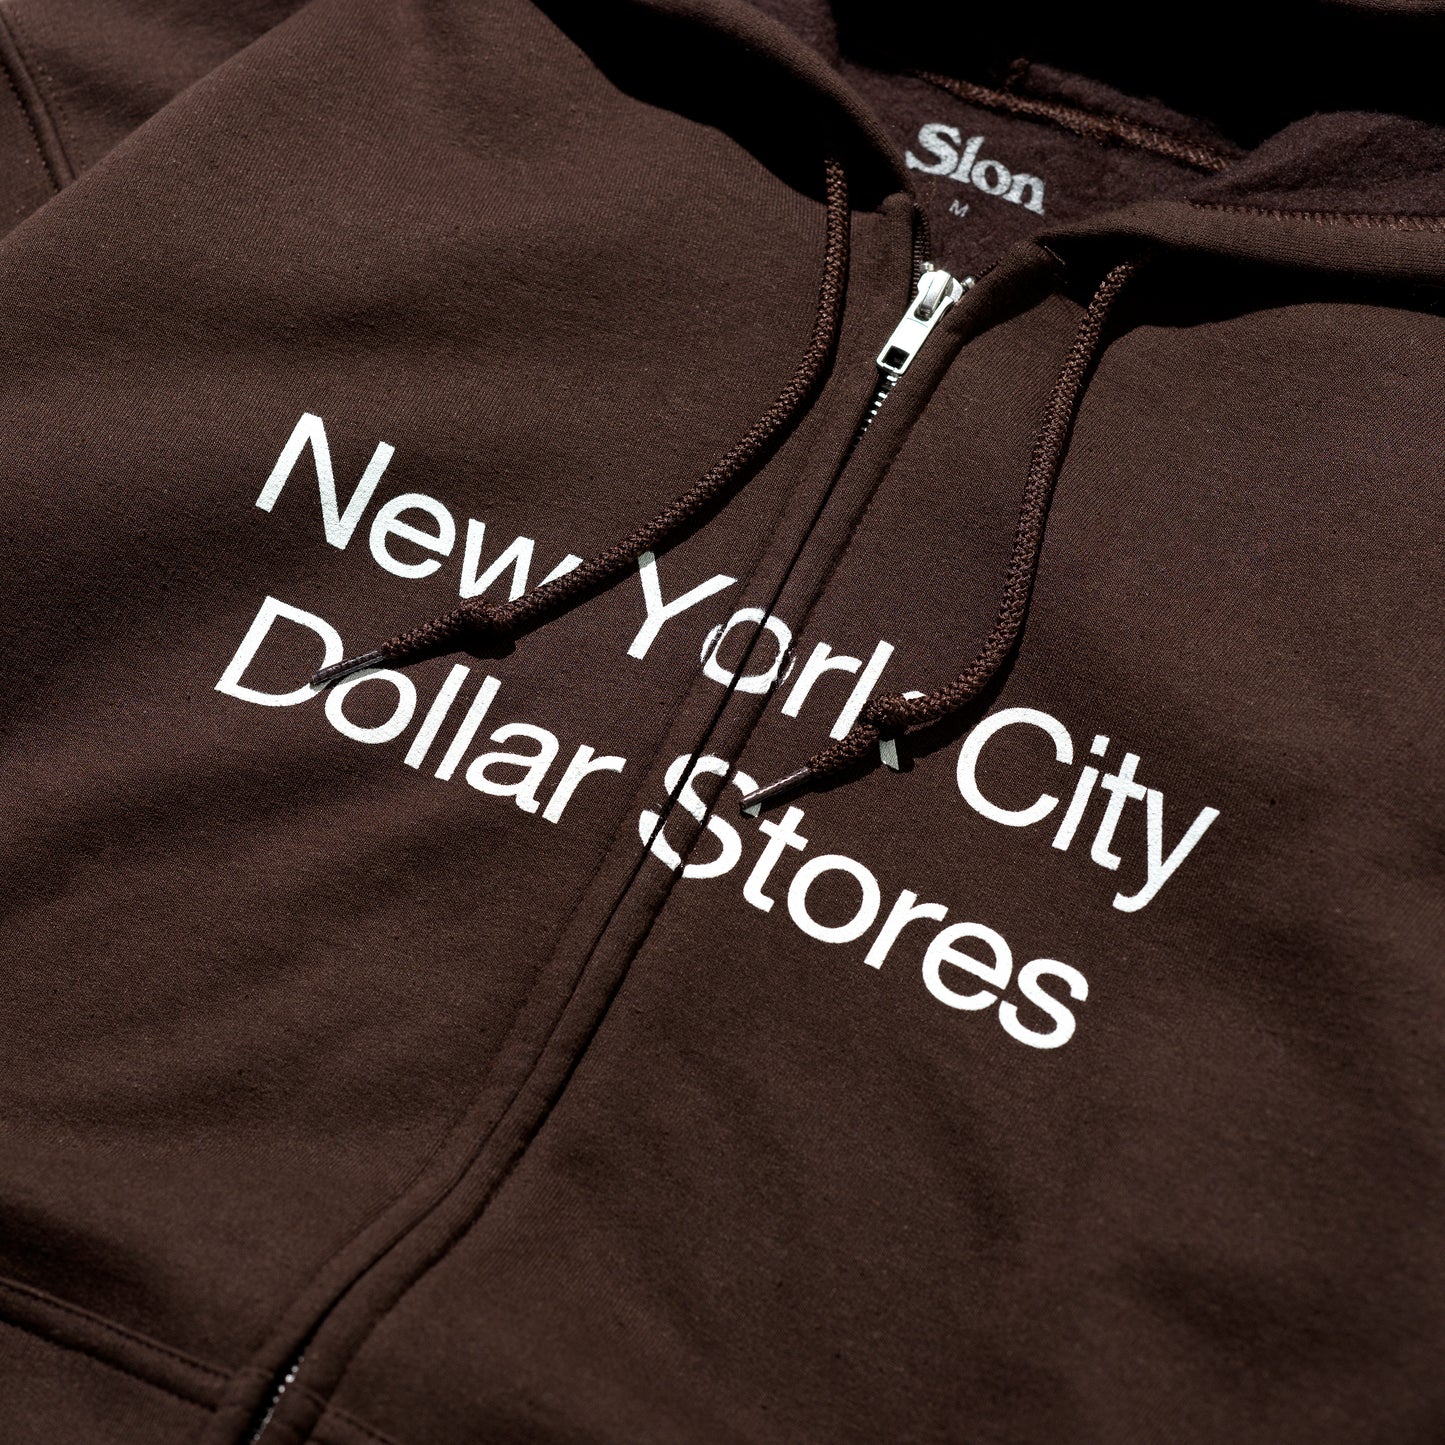 Slon NYC Dollar Stores Zip Hooded "Brown"